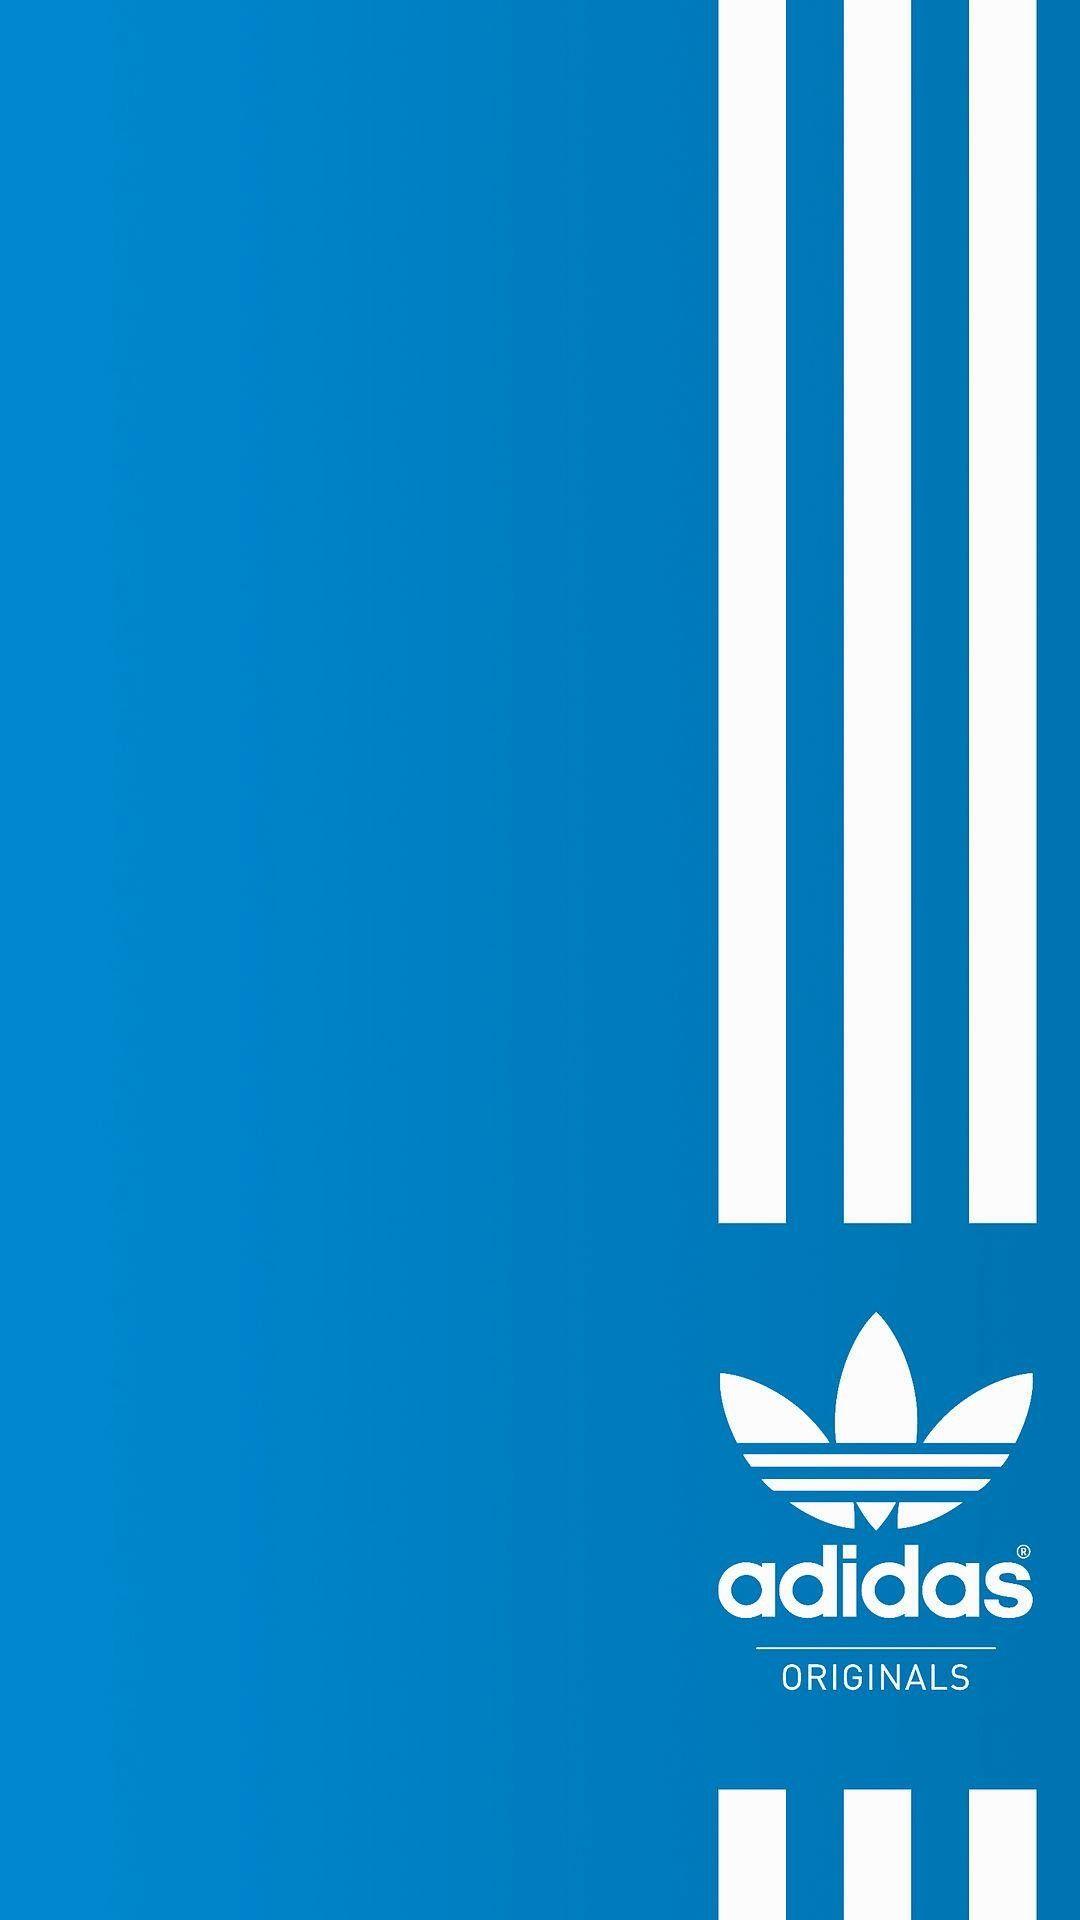 iPhone Wallpapers - Top Free Adidas iPhone Backgrounds - WallpaperAccess